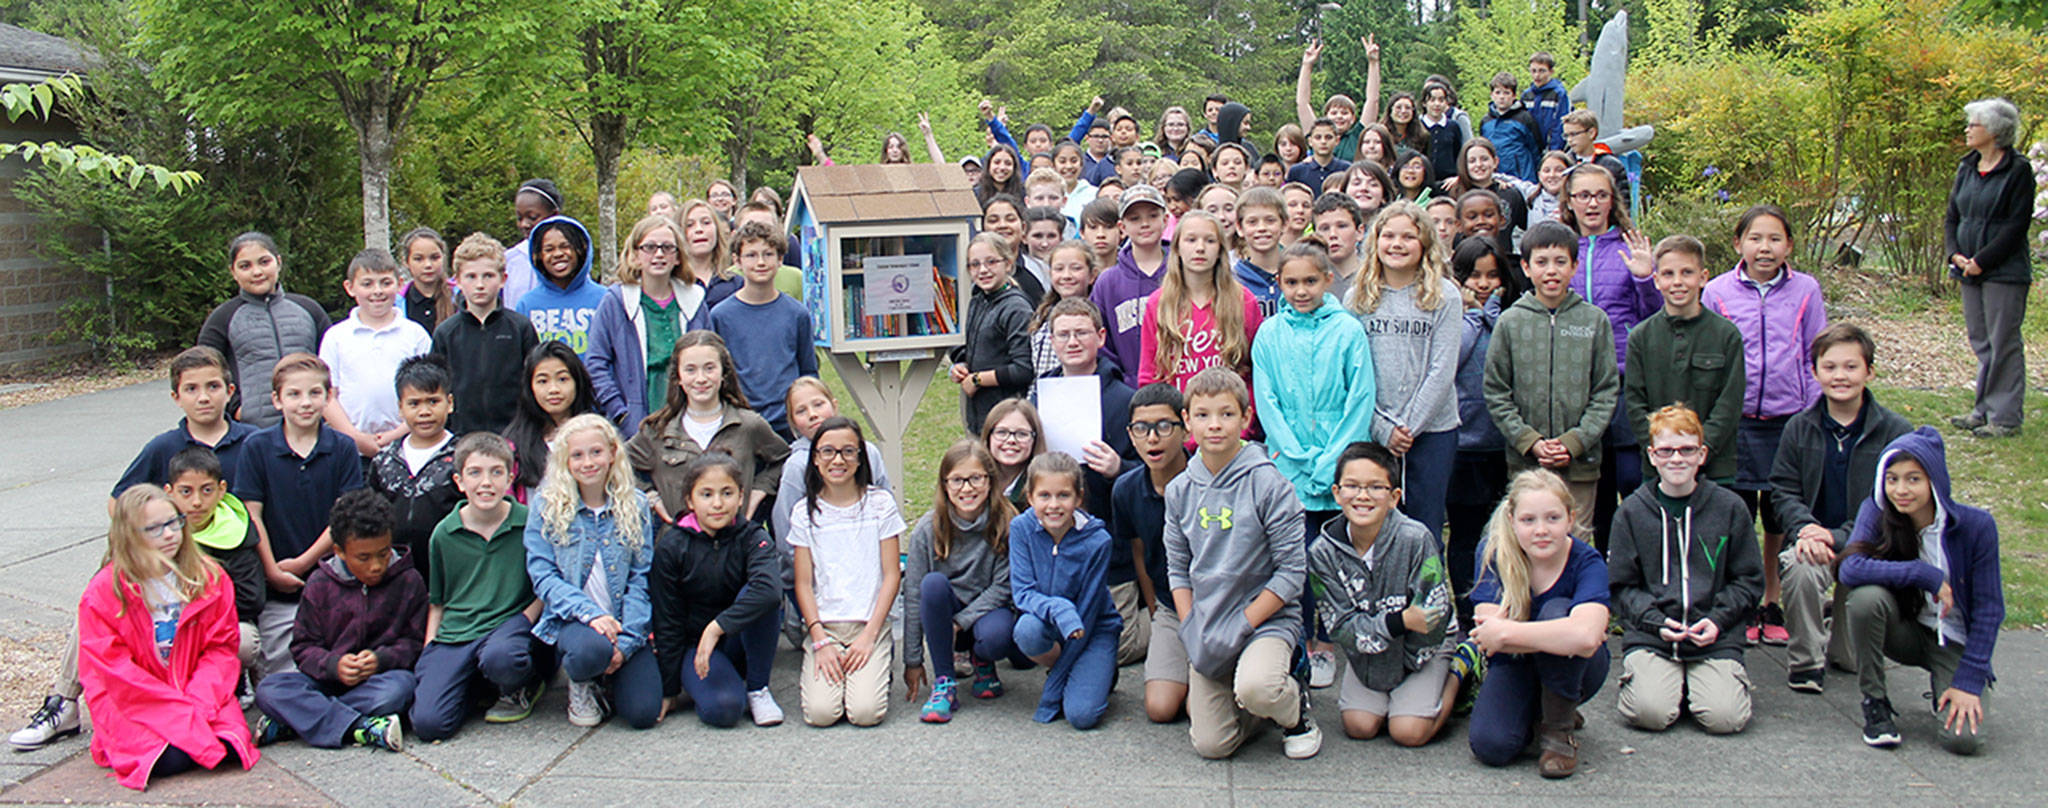 Fifth-graders at Vinland Elementary pose with their graduation gift to the school: a Little Free Library filled with donated books. Terryl Asla/Kitsap News Group